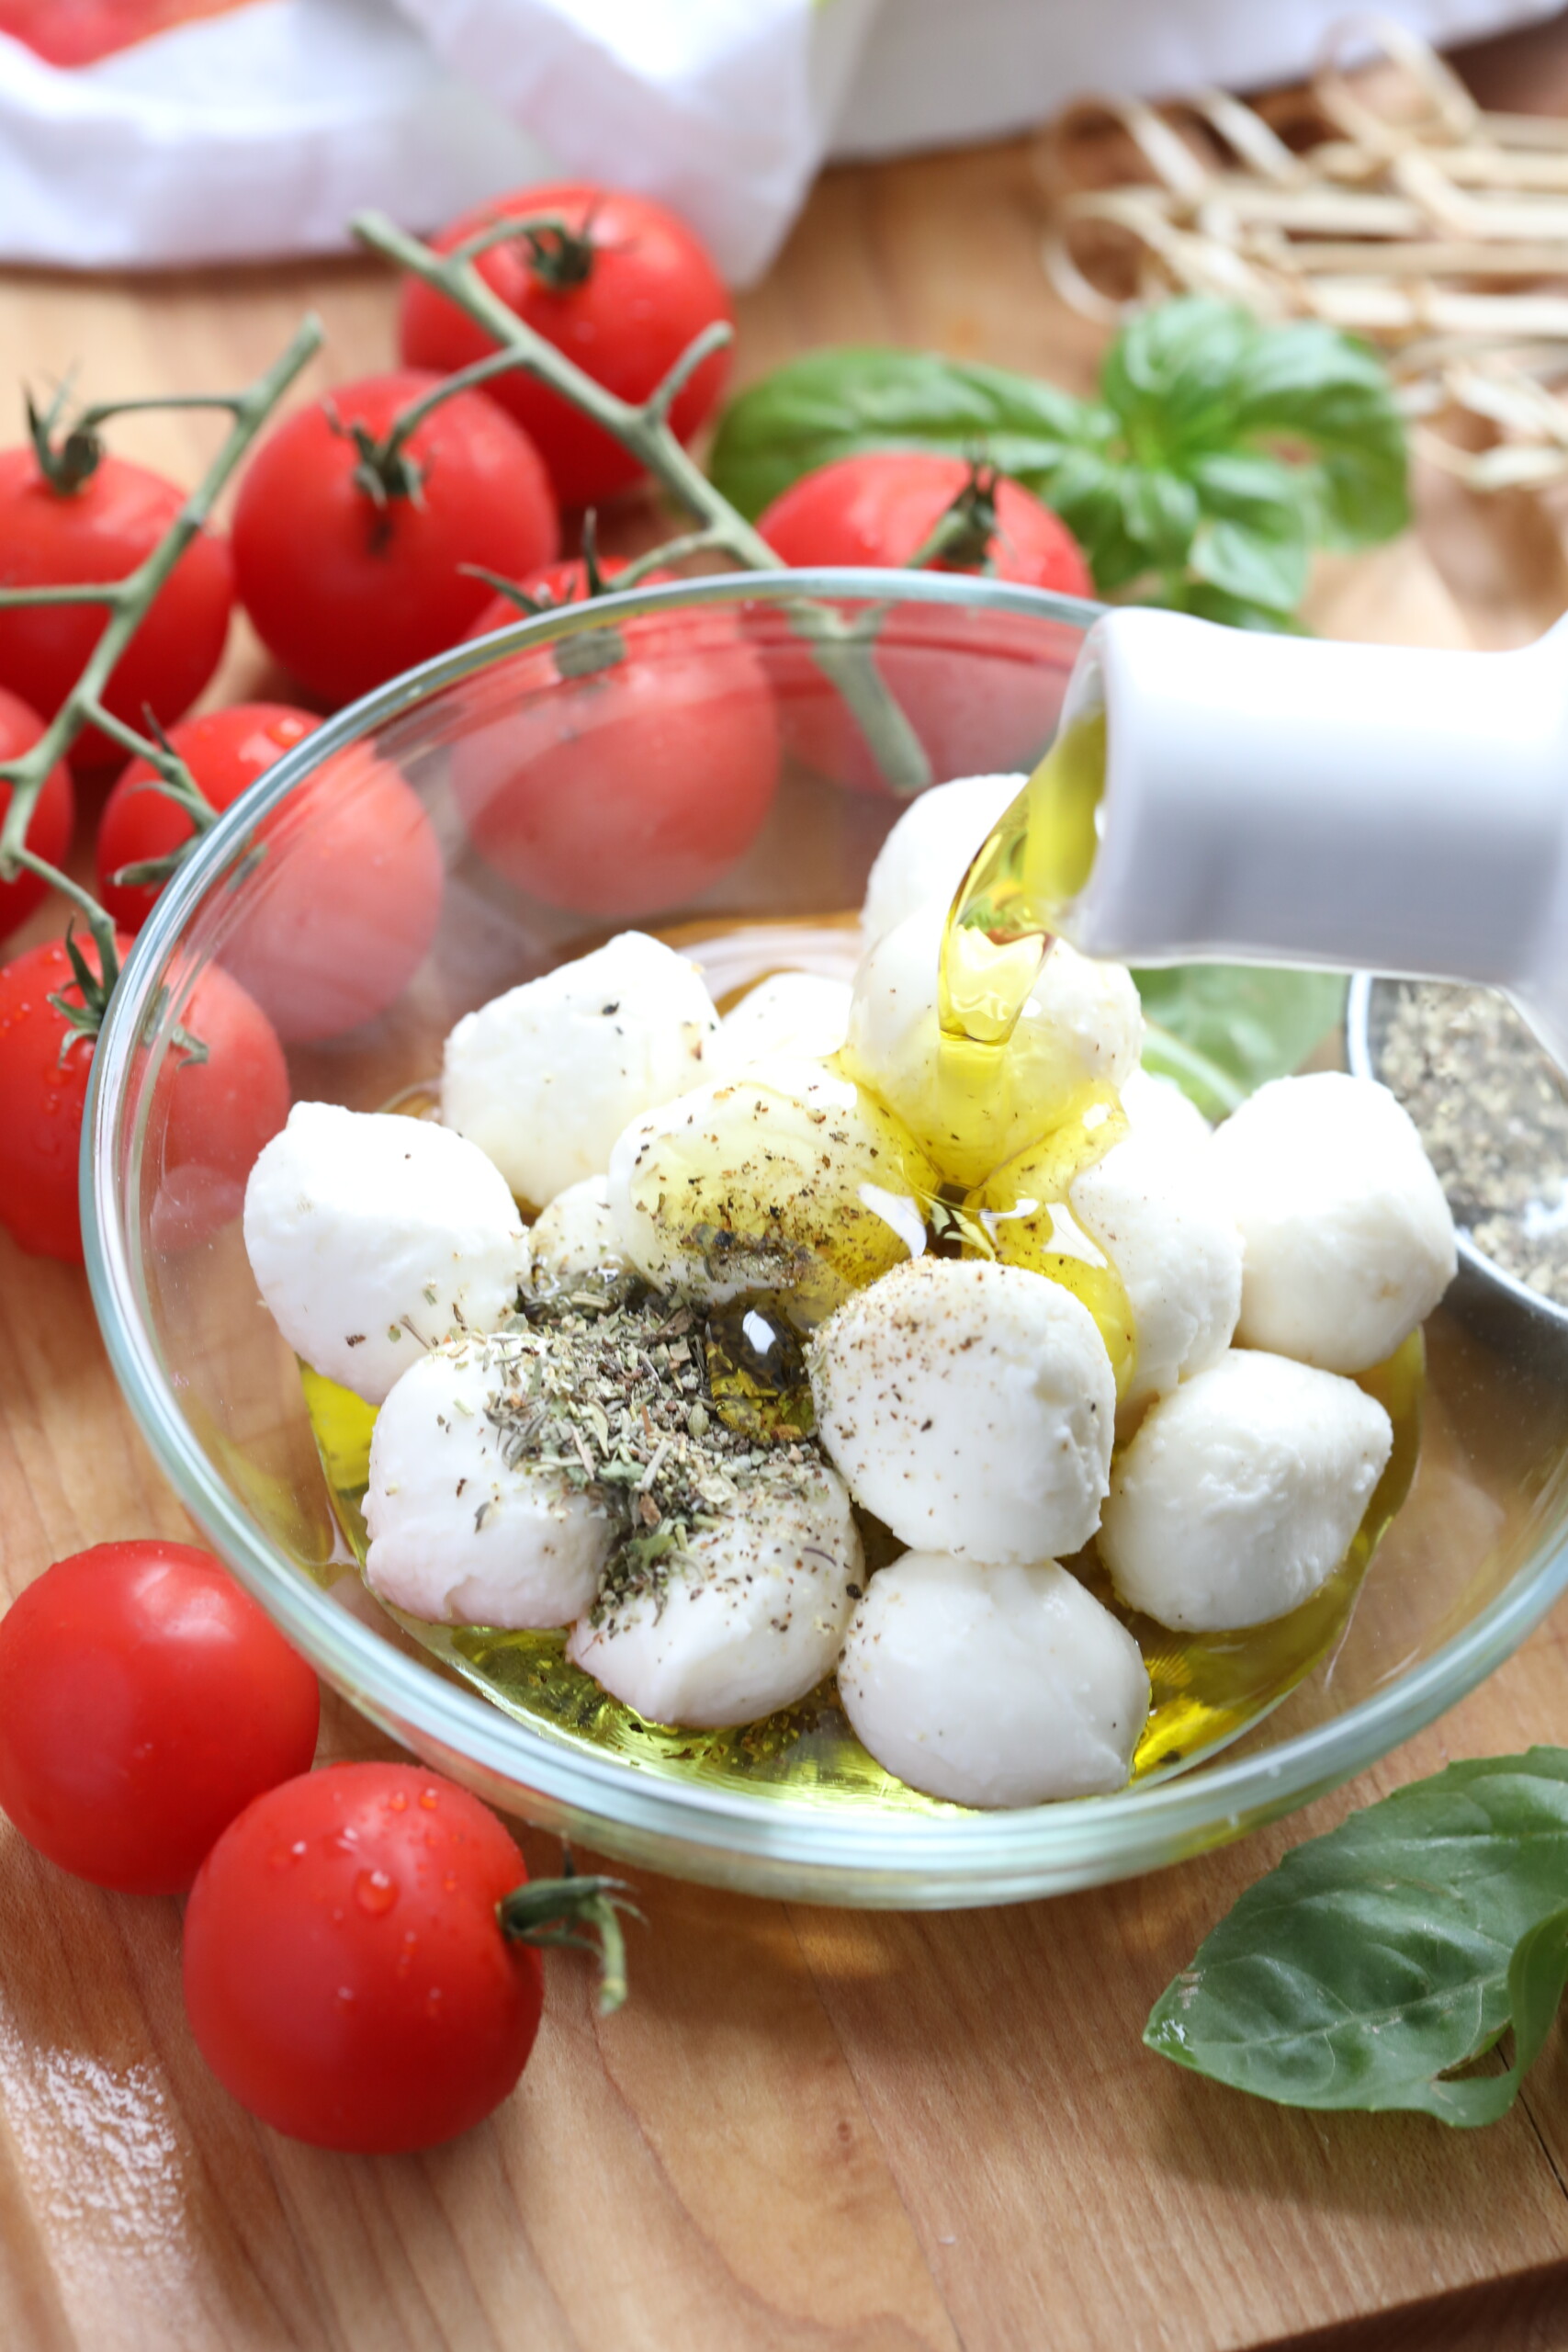 pouring oil over cheese and seasonings to make Caprese Skewers